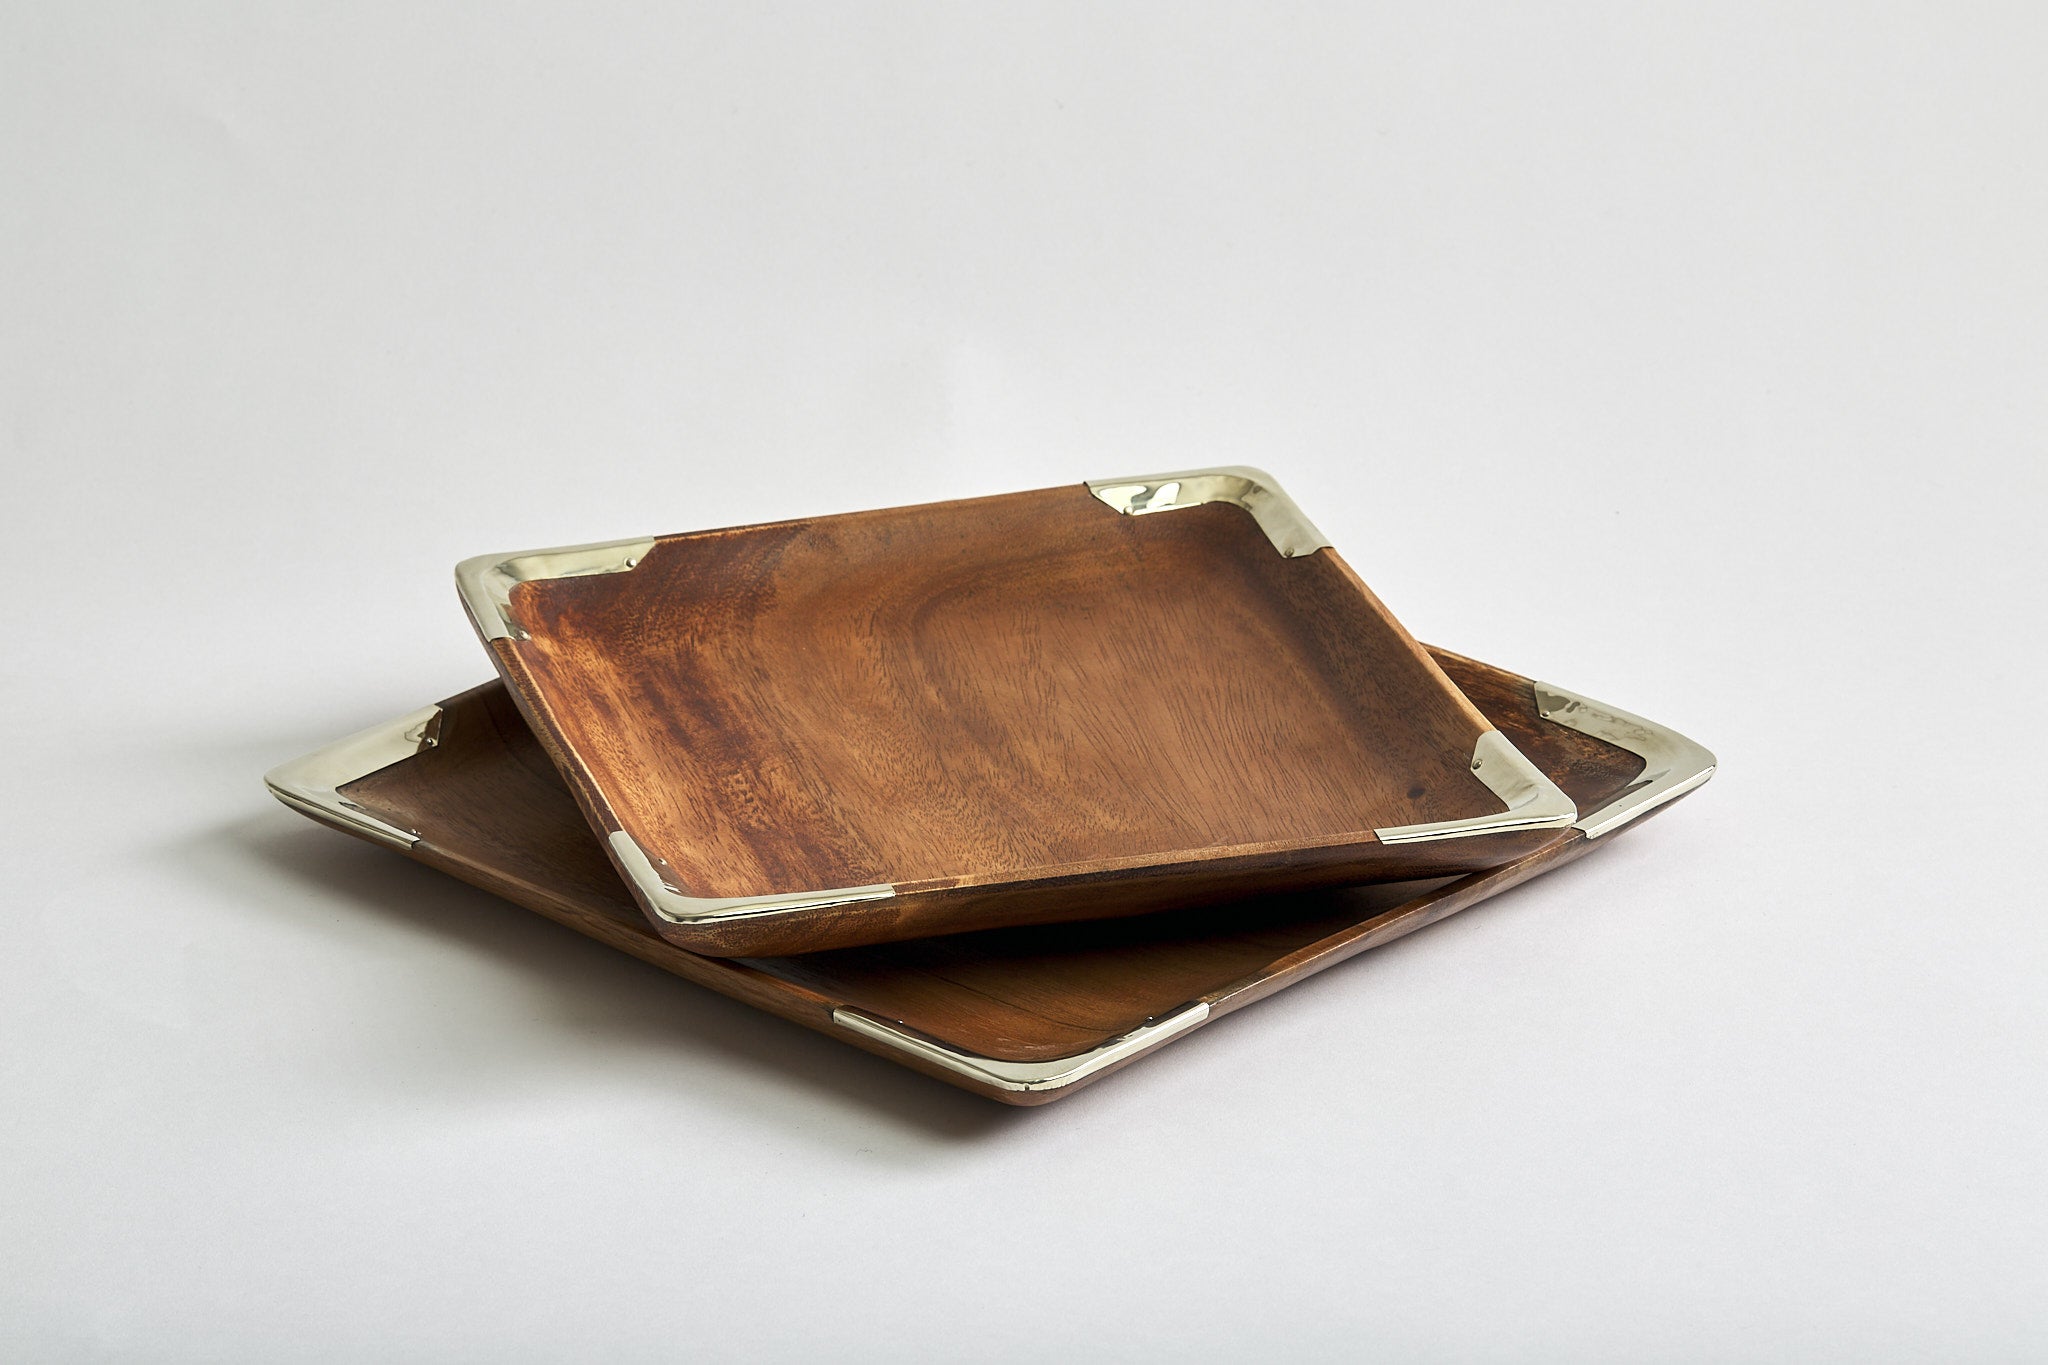 Square shaped Ibera decorative trays hand-carved made of acacia wood in Argentina with curved edges accented with Alpaca silver metal trim